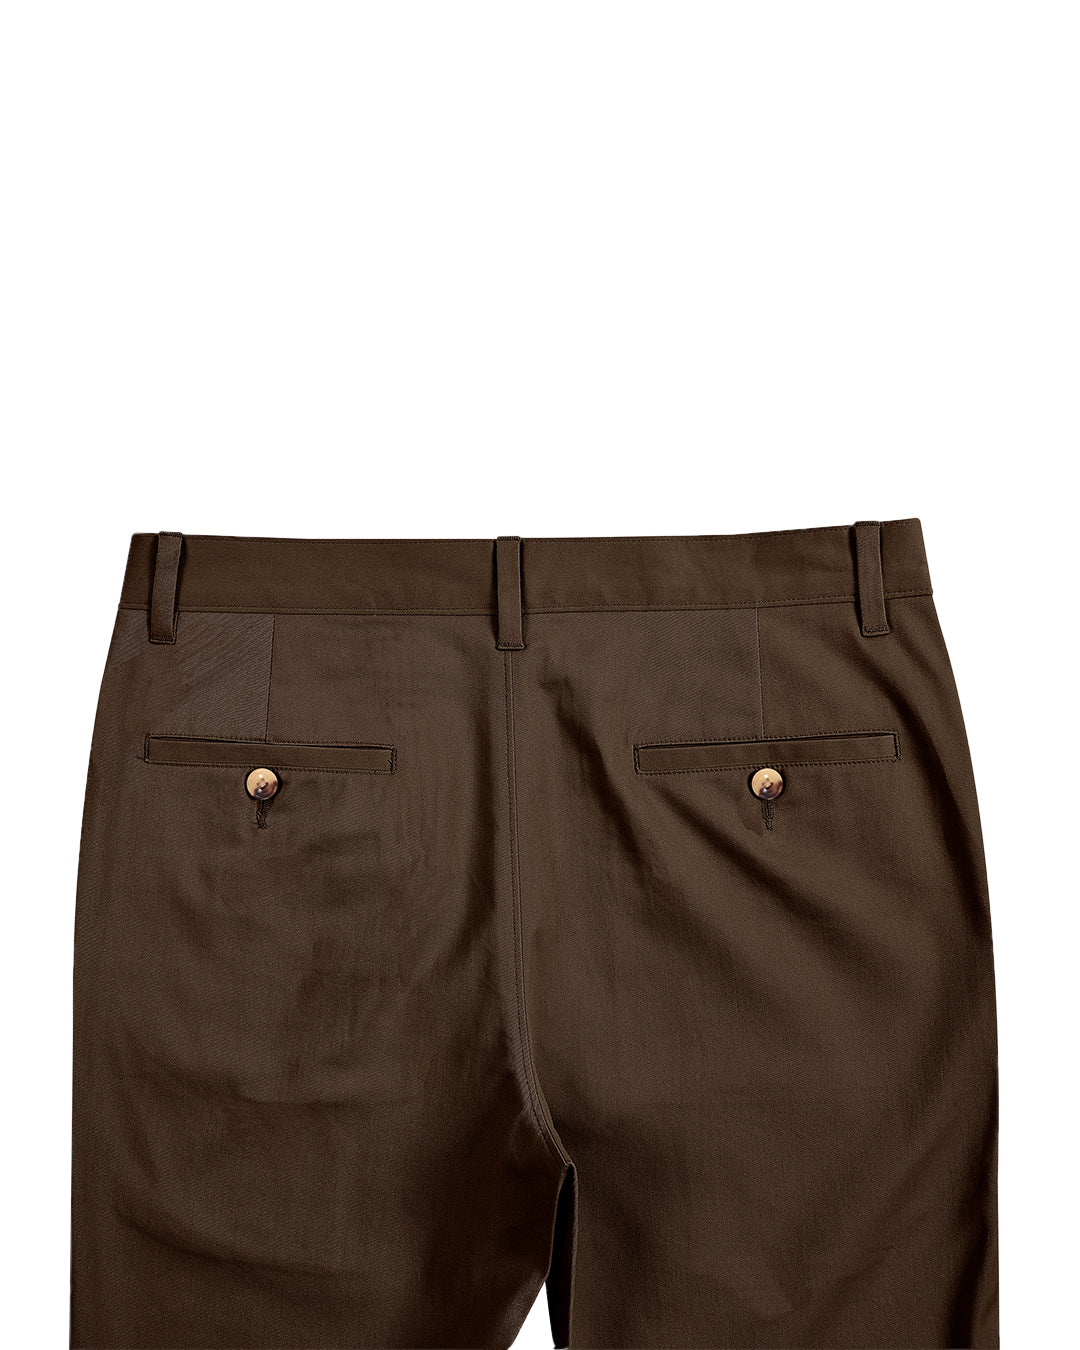 Back view of custom Genoa Chino pants for men by Luxire in coffee brown